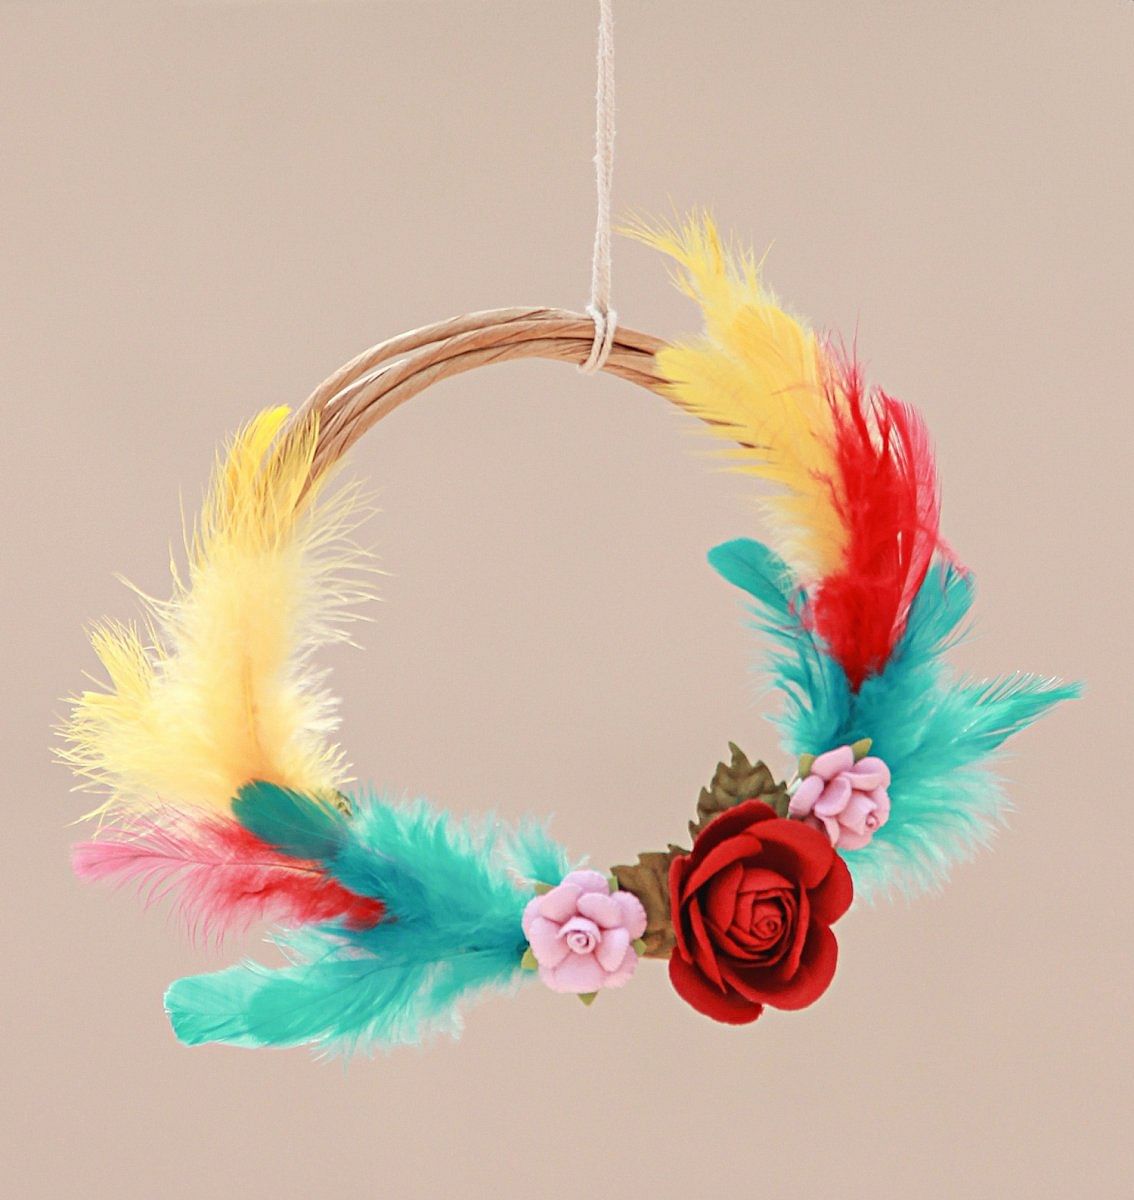 A wreath made of feathers